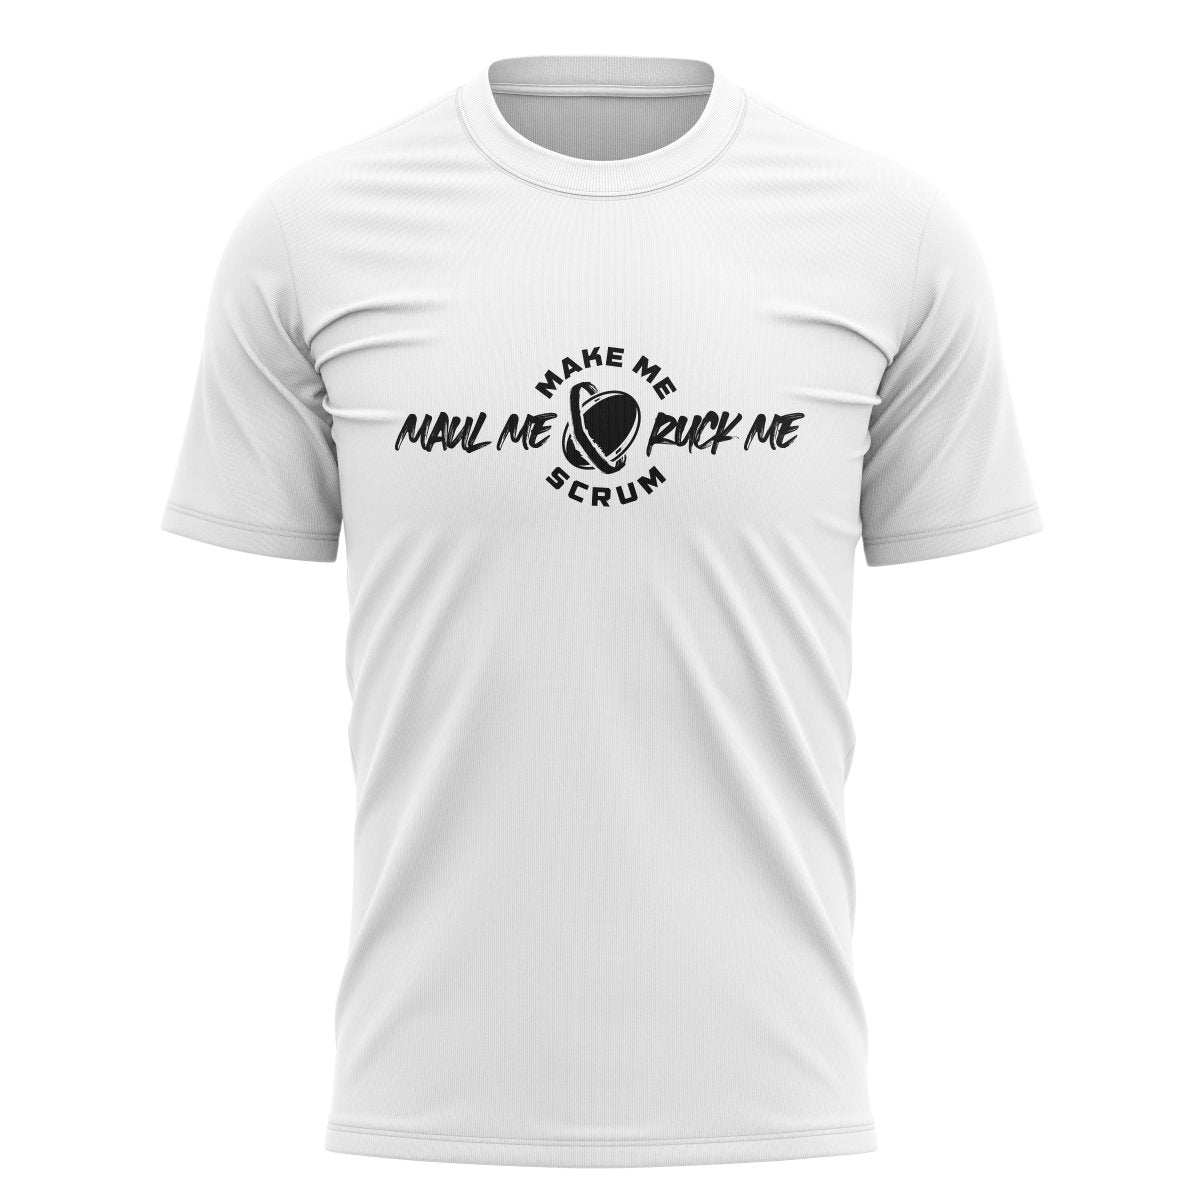 Make Me Scrum Graphic Tee - The Rugby Shop